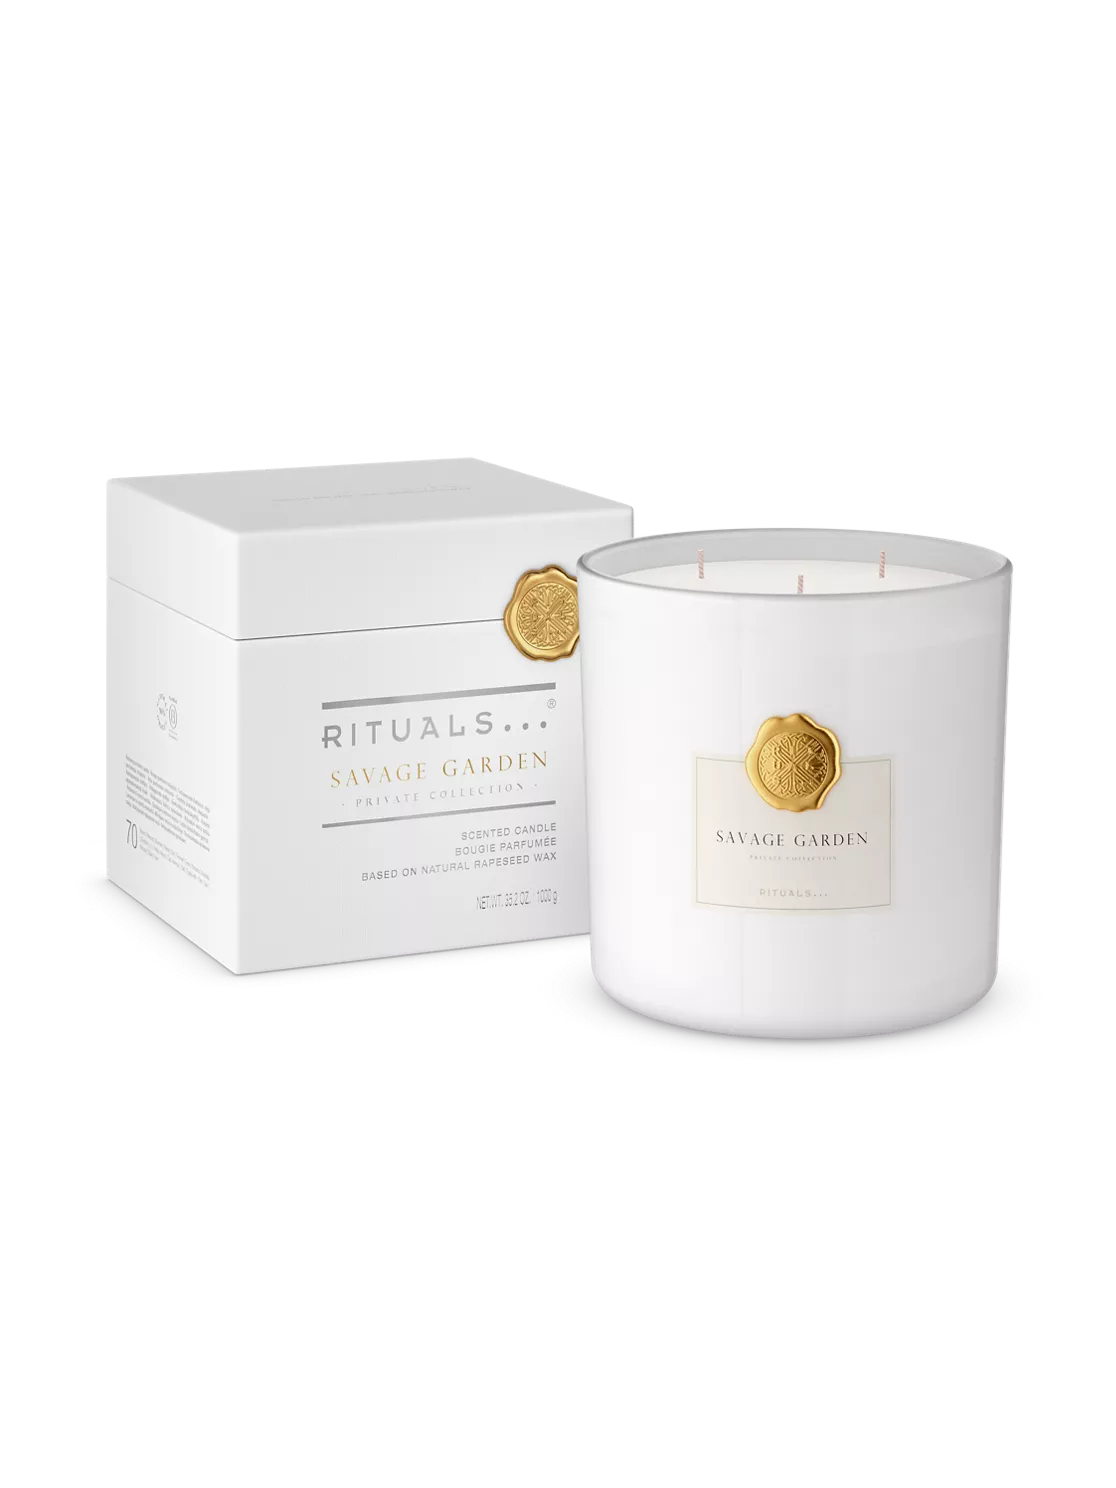 Garden peonies & Rituals precious amber luxury scented candle